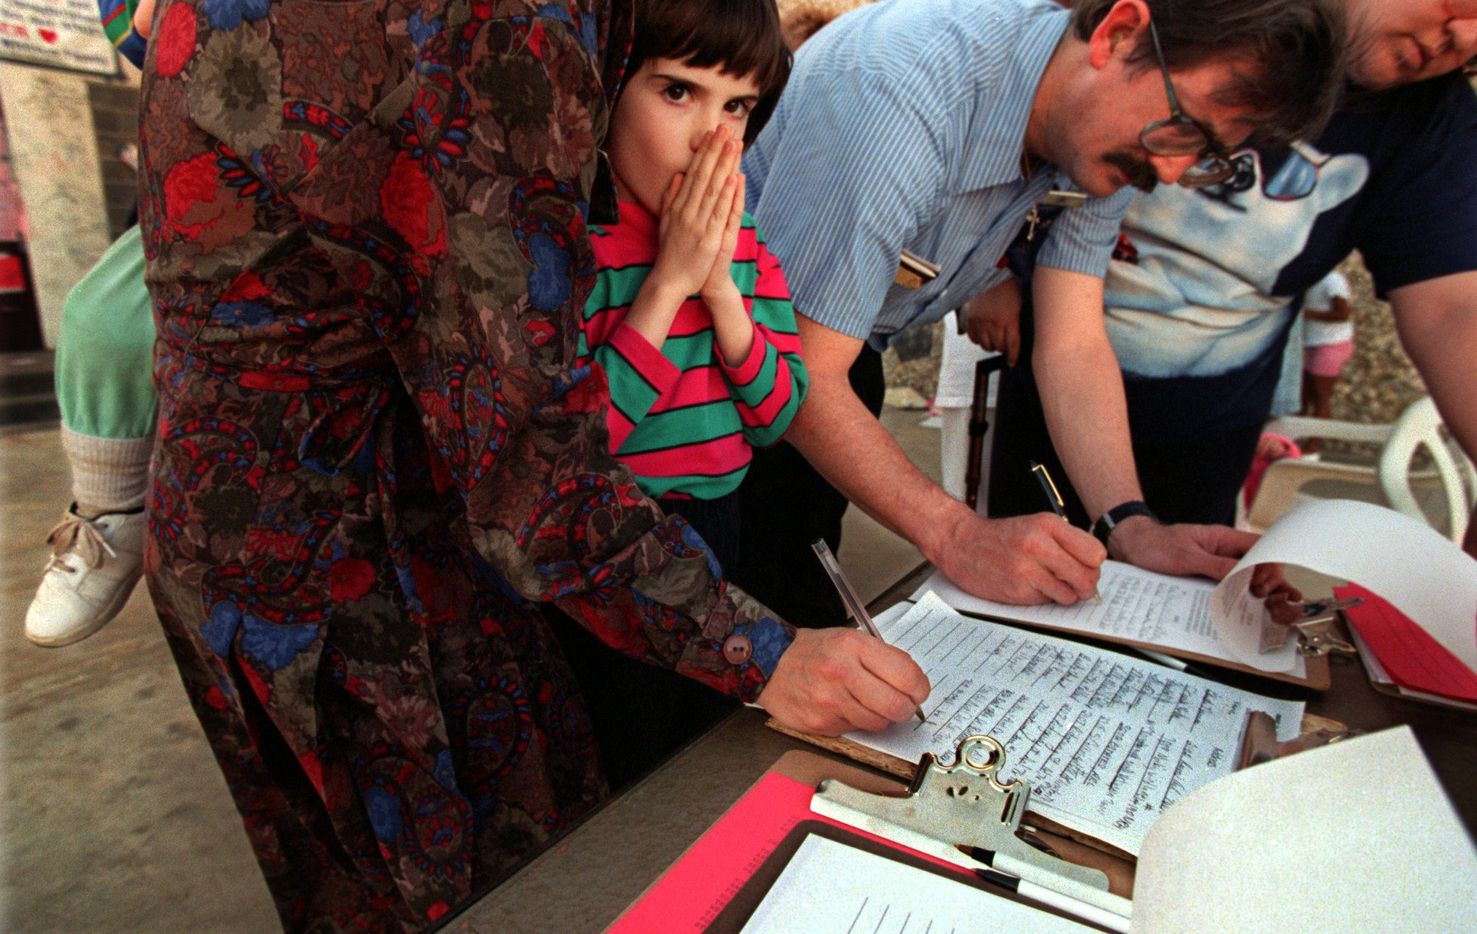 Ashley Hackney, 7, of Arlington waits while her mother, Julia, signs a petition at the site of  Amber Hagerman's abduction. At right: James Sasser, 43, of  Arlington, gets assistance from Bruce Seybert, 39, of Arlington as he signs the petition. Seybert and others spearheaded  an effort for the state to make an Amber Hagerman amendment to the Ashley Astell bill. That amendment would mandate, among  other things, a mandatory life sentence without parole for  convicted child sex offenders. Seybert said an estimated 1,000 people a day visited the site of Amber's abduction.